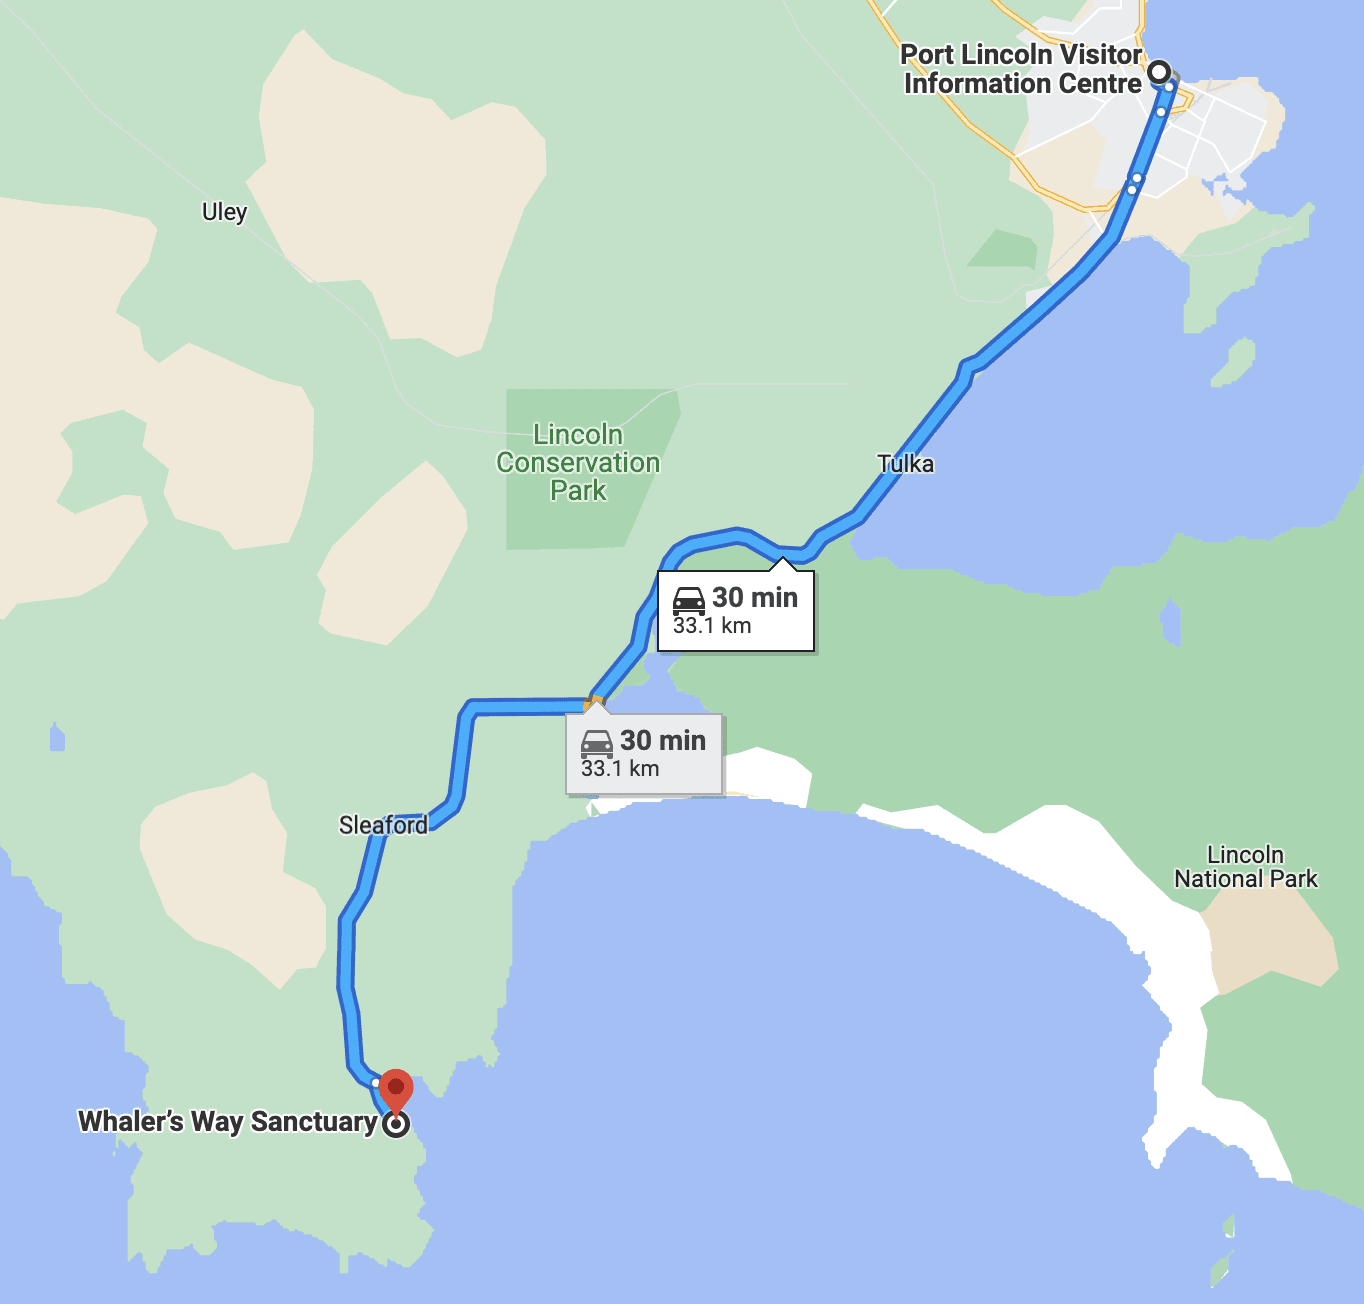 How to get to Whalers Way - Map showing route from Port Lincoln to the entrance of Whalers Way